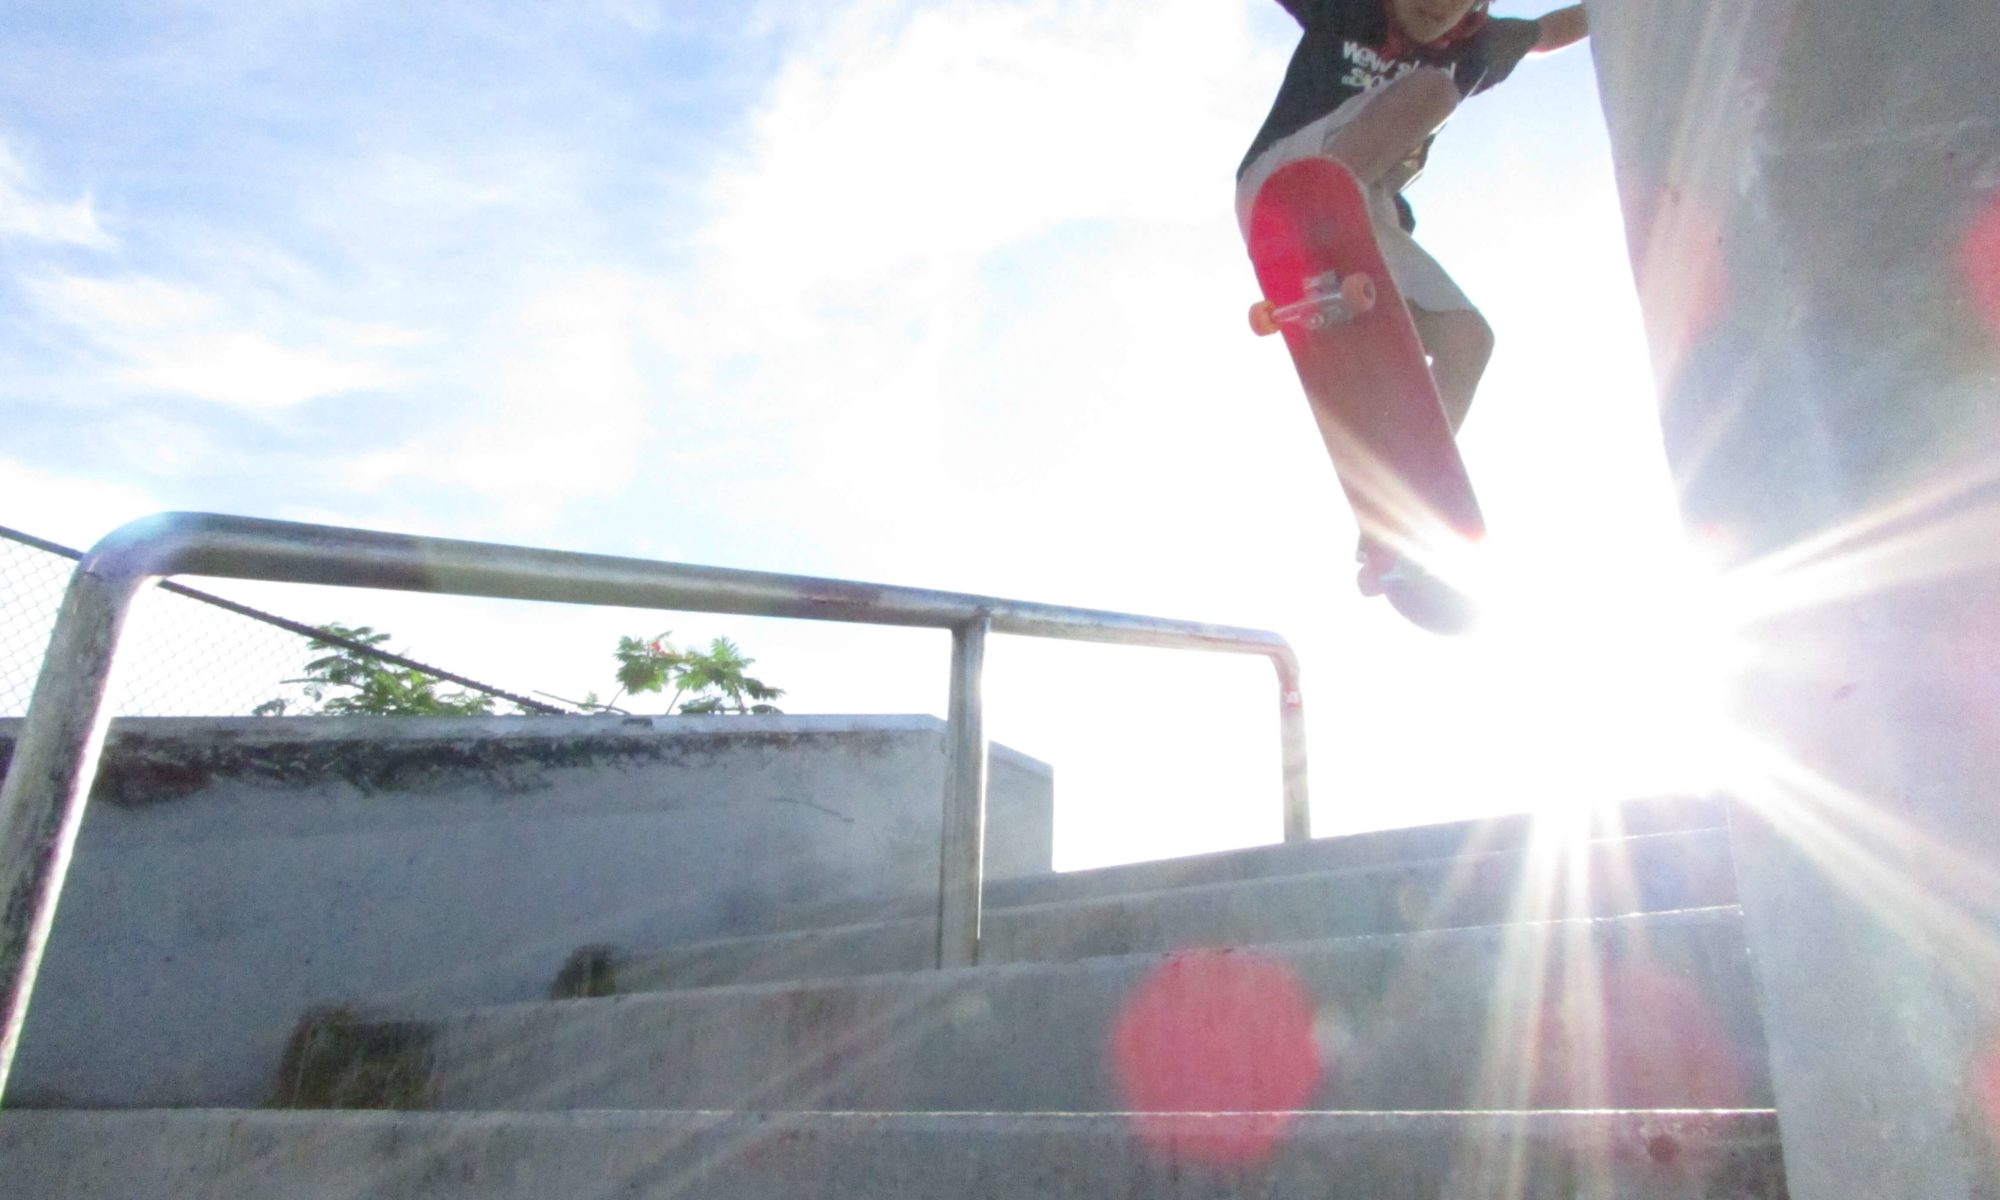 Jose, young skater, ollies a 4-stair over the sun 4 at Westwind Lakes Skatepark Miami